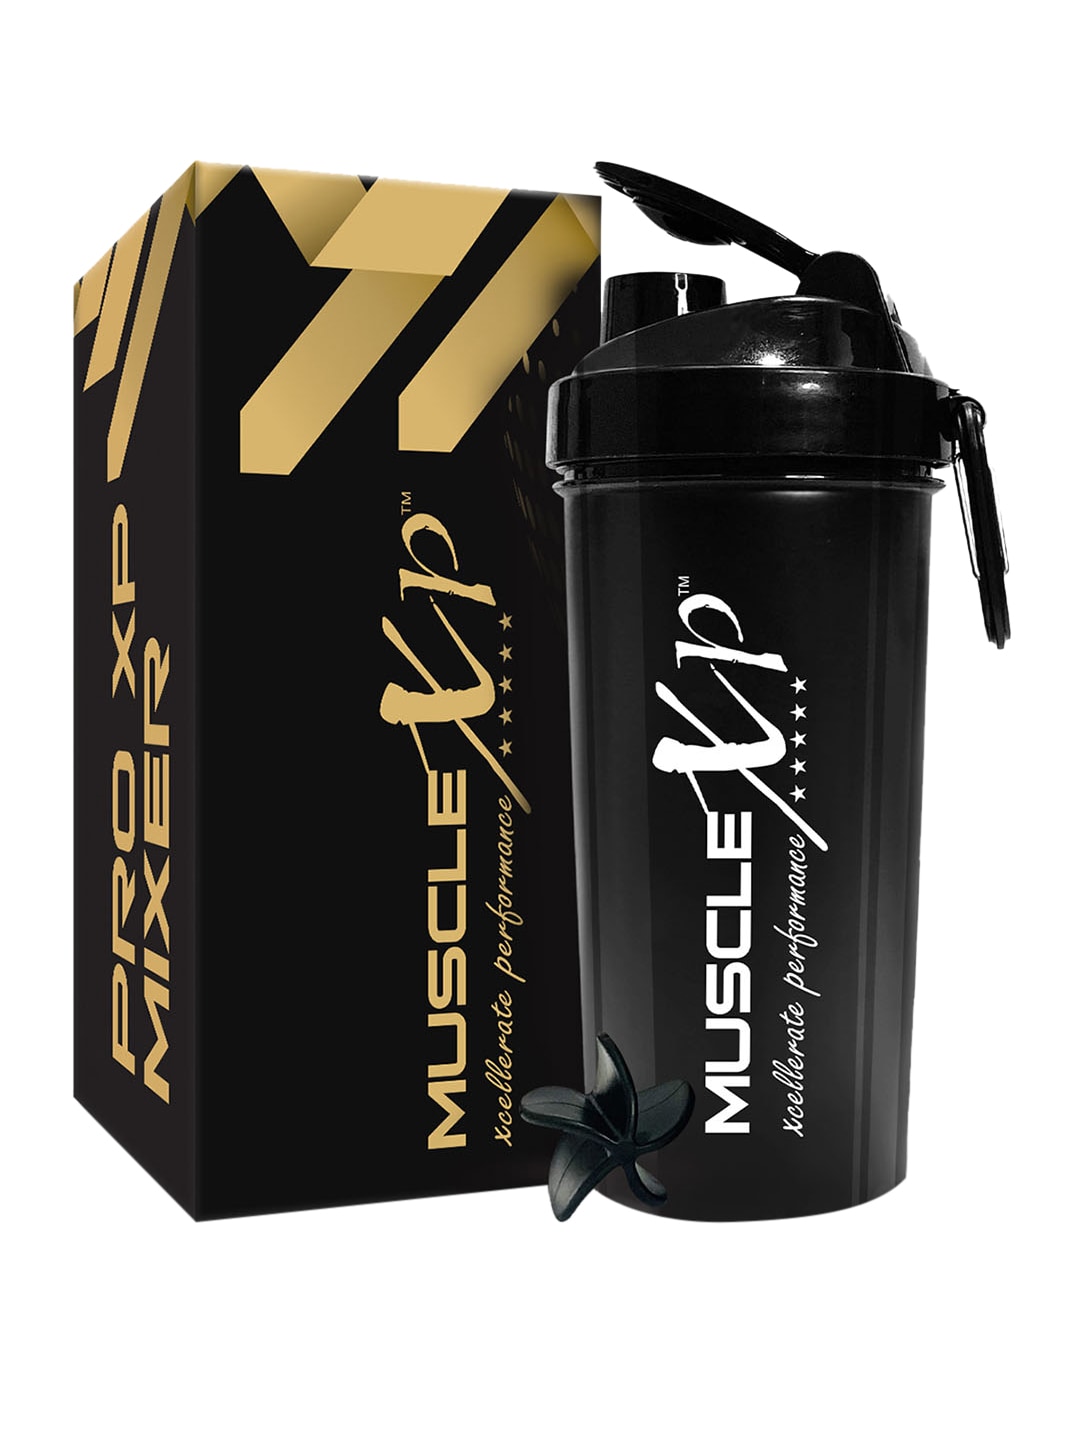 MUSCLEXP Black Printed Gym Shaker PRO XP Mixer Leakproof 700 ml Price in India